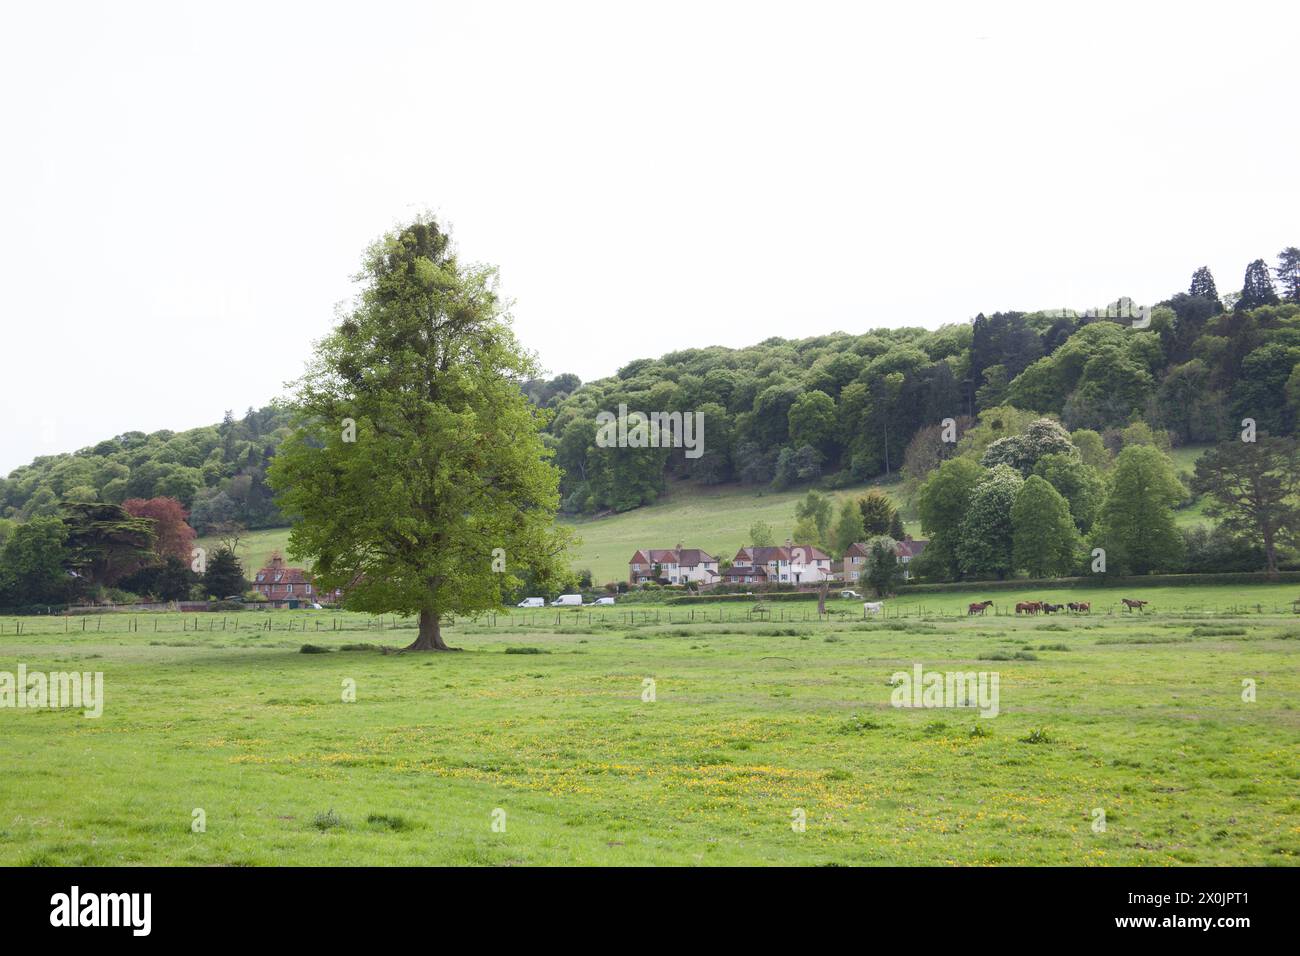 Views of the village of Hambleden, Buckinghamshire in the United Kingdom Stock Photo